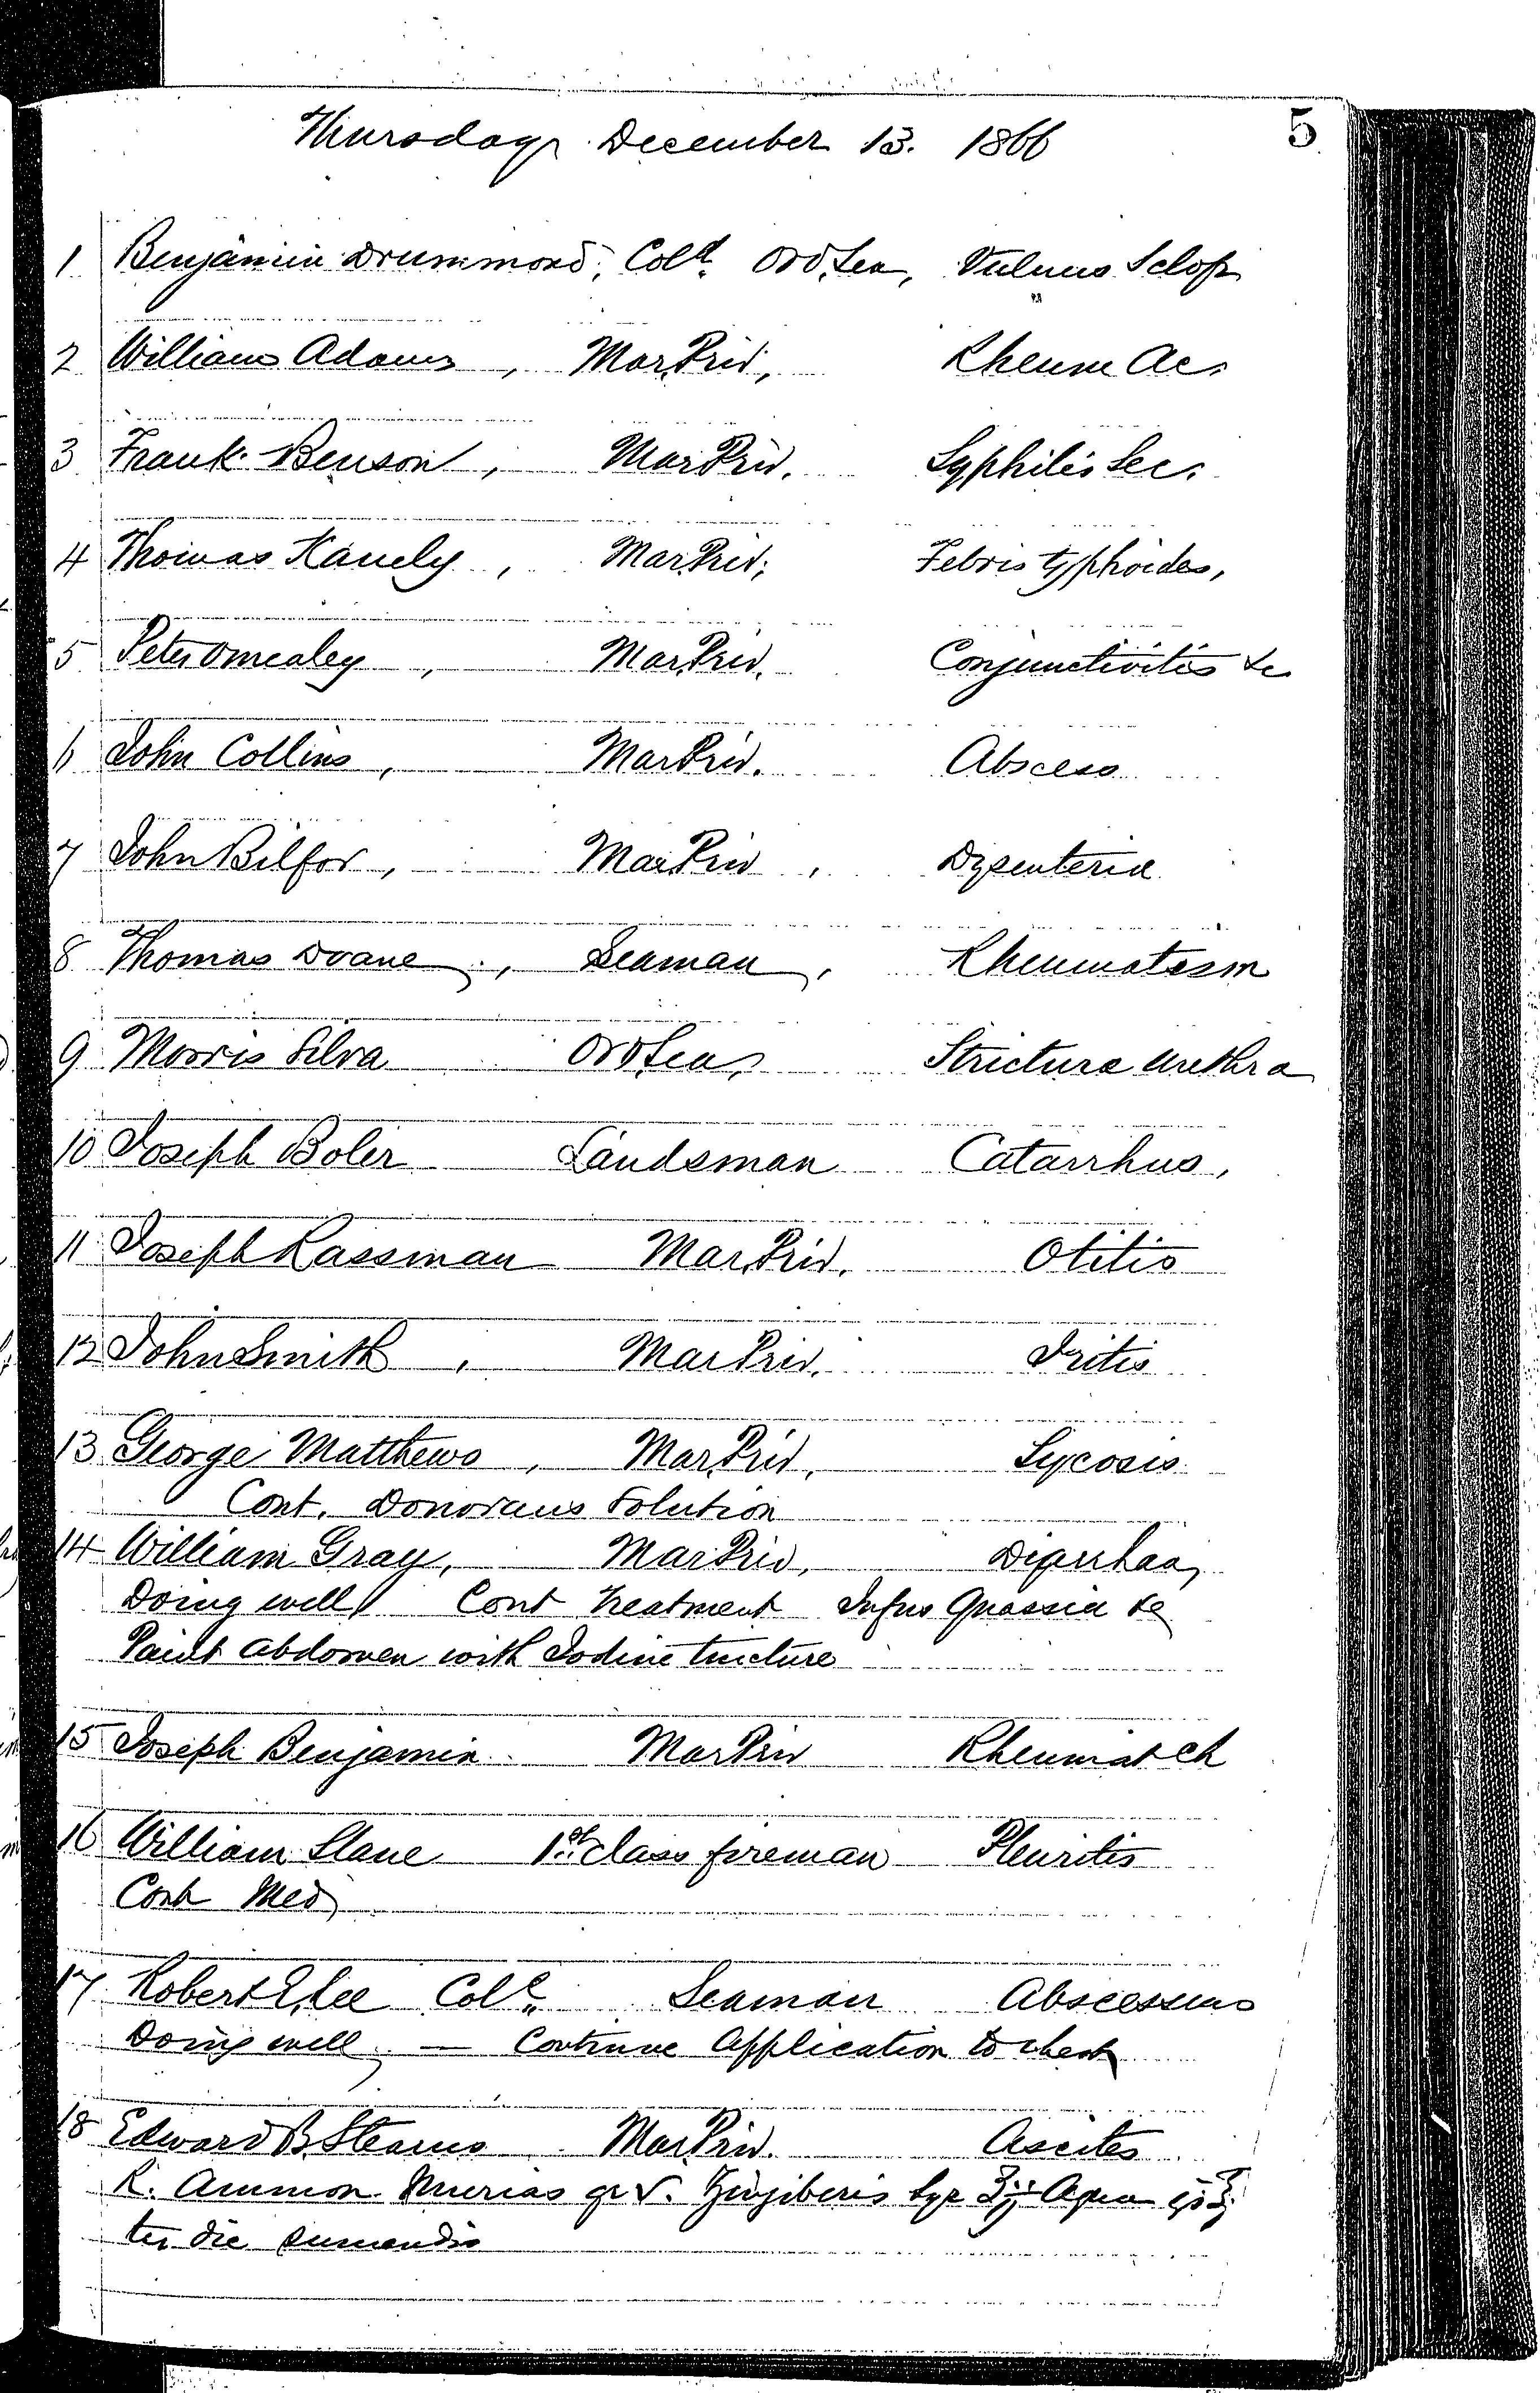 Patients in the Naval Hospital, Washington DC, on December 13, 1866, page 1 of 3, in the Medical Journal, October 1, 1866 to March 20, 1867